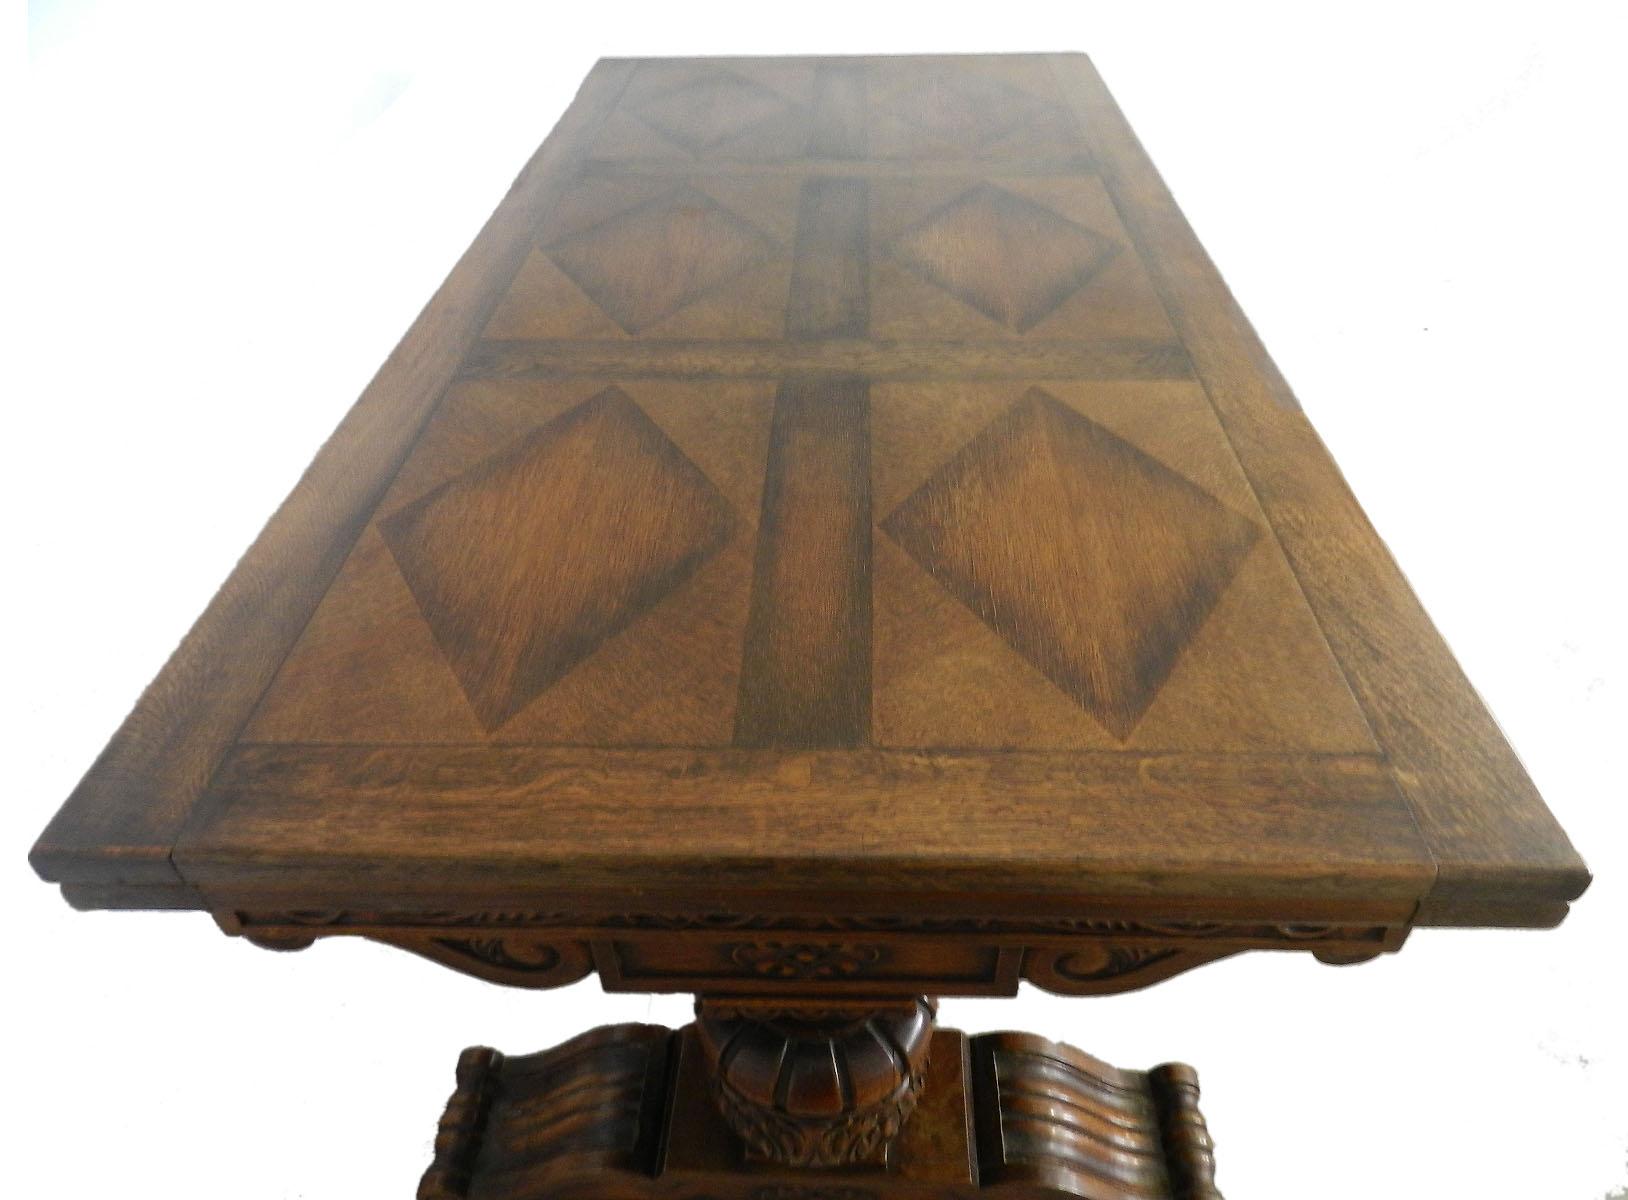 Oak Renaissance Revival drawer leaf table extending to 11.12ft 133.5ins 
Unusual diamond parquet top 
Carved oak solid wood and veneer parquet panels
French Spanish Basque early 20th century Renaissance Revival 
This table will seat 12 -14